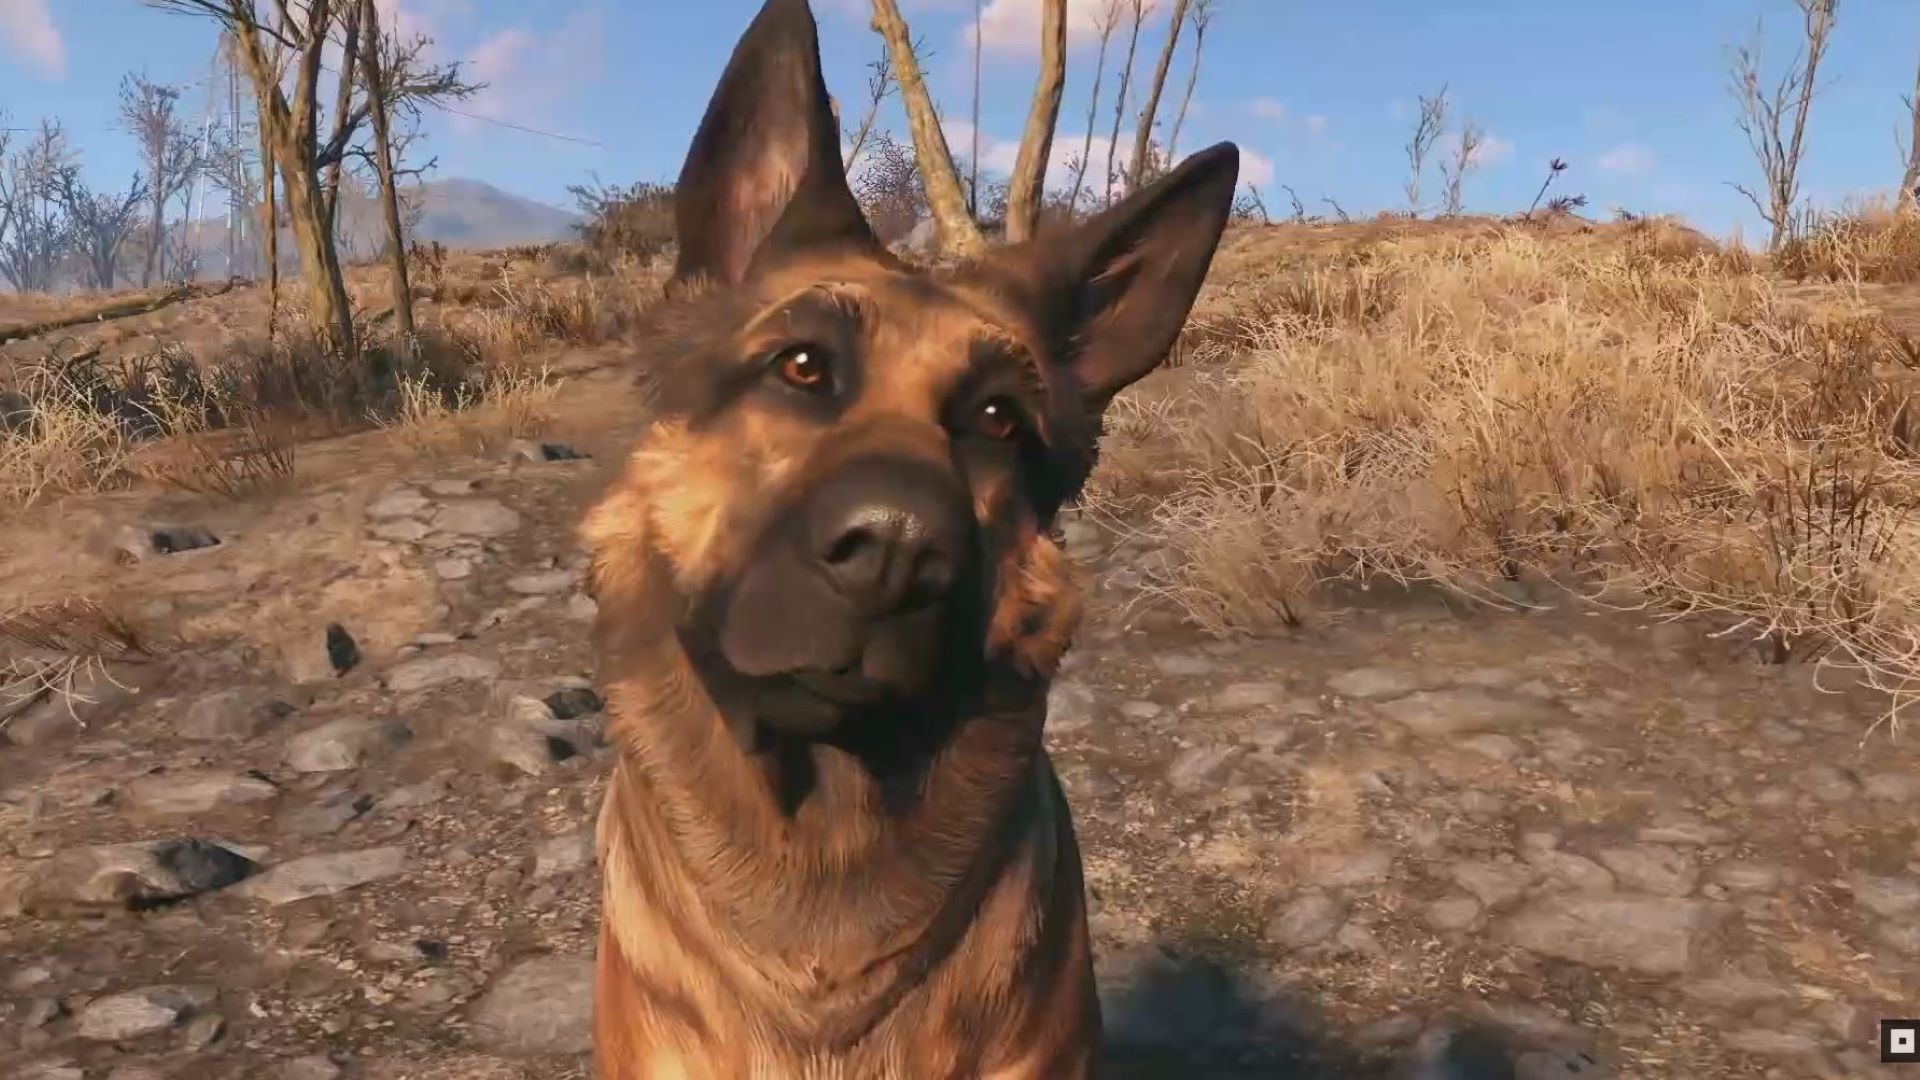 Xbox donates $10,000 to charity in memory of Dogmeat from Fallout 4 |  GamesRadar+